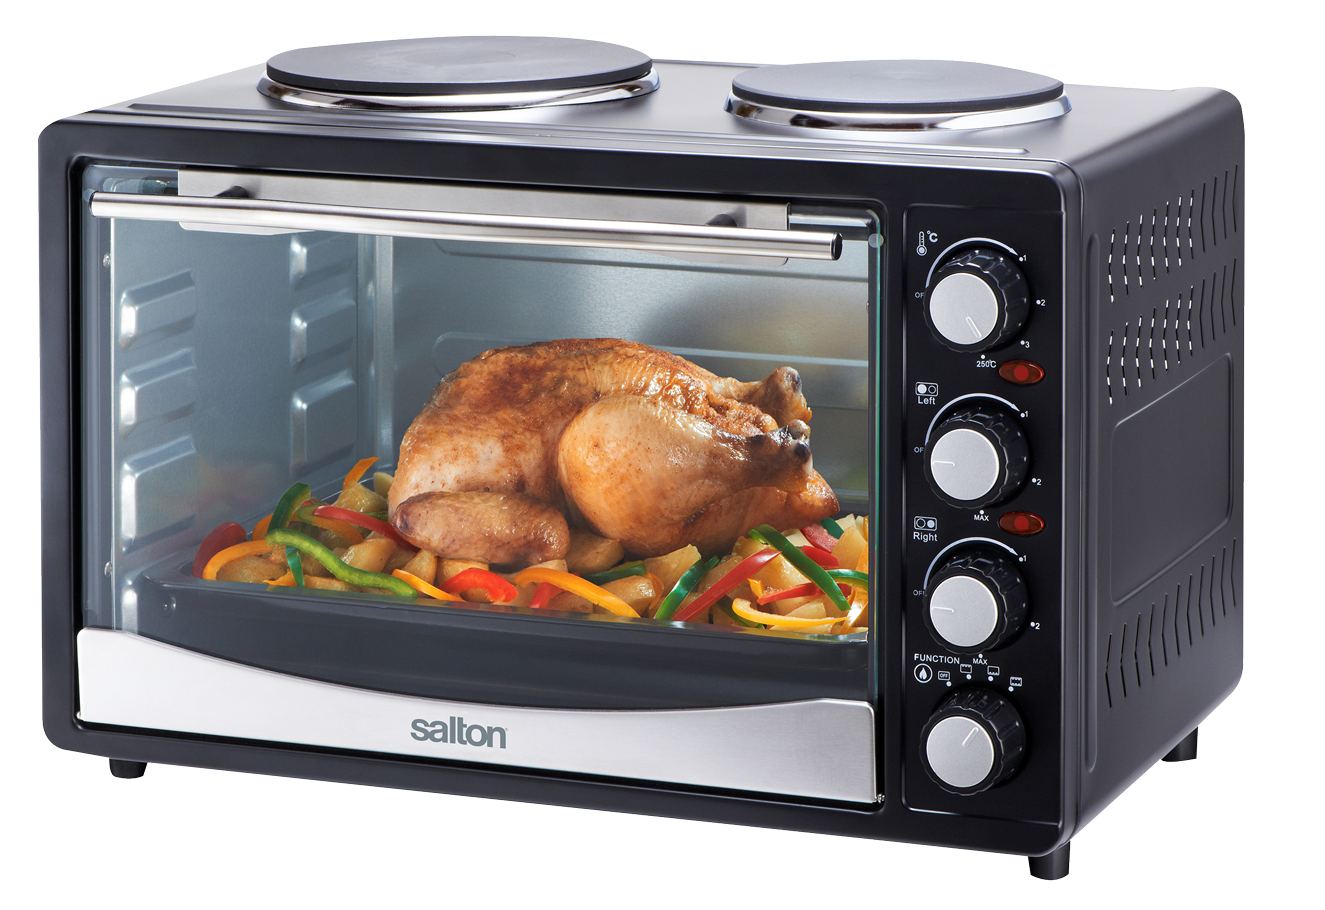 toaster clipart oven toaster